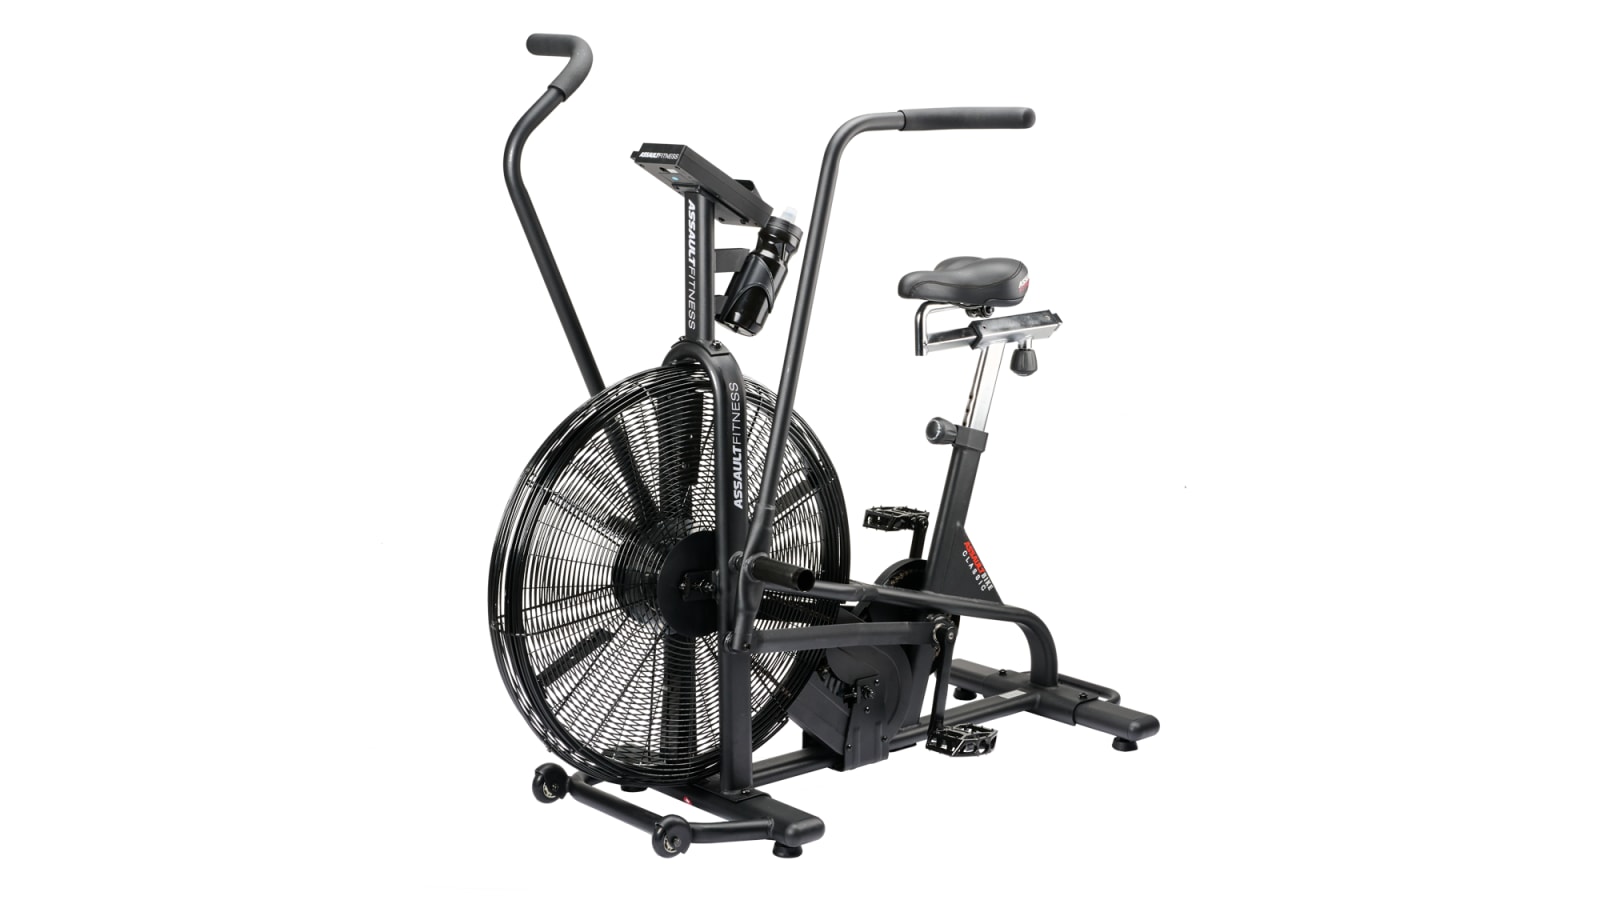 The Instant Upright Bike Stand